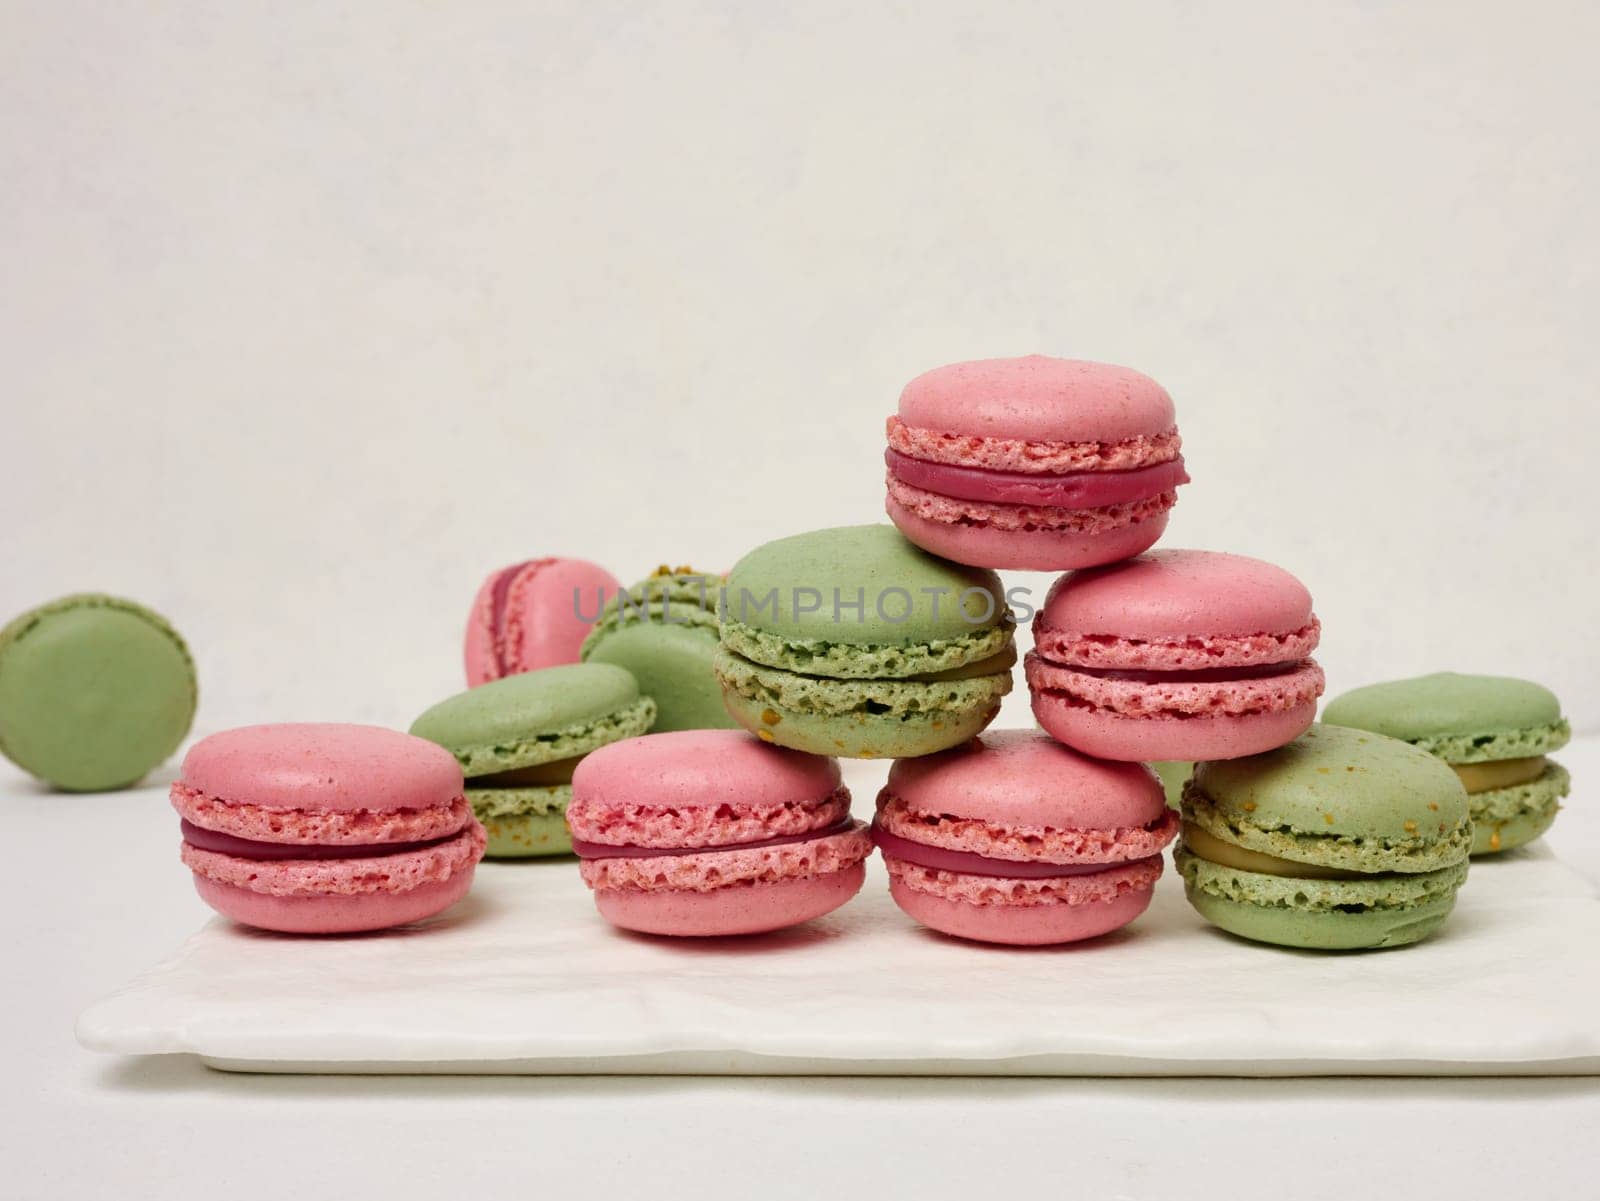 Raspberry and pistachio macarons on a white background by ndanko